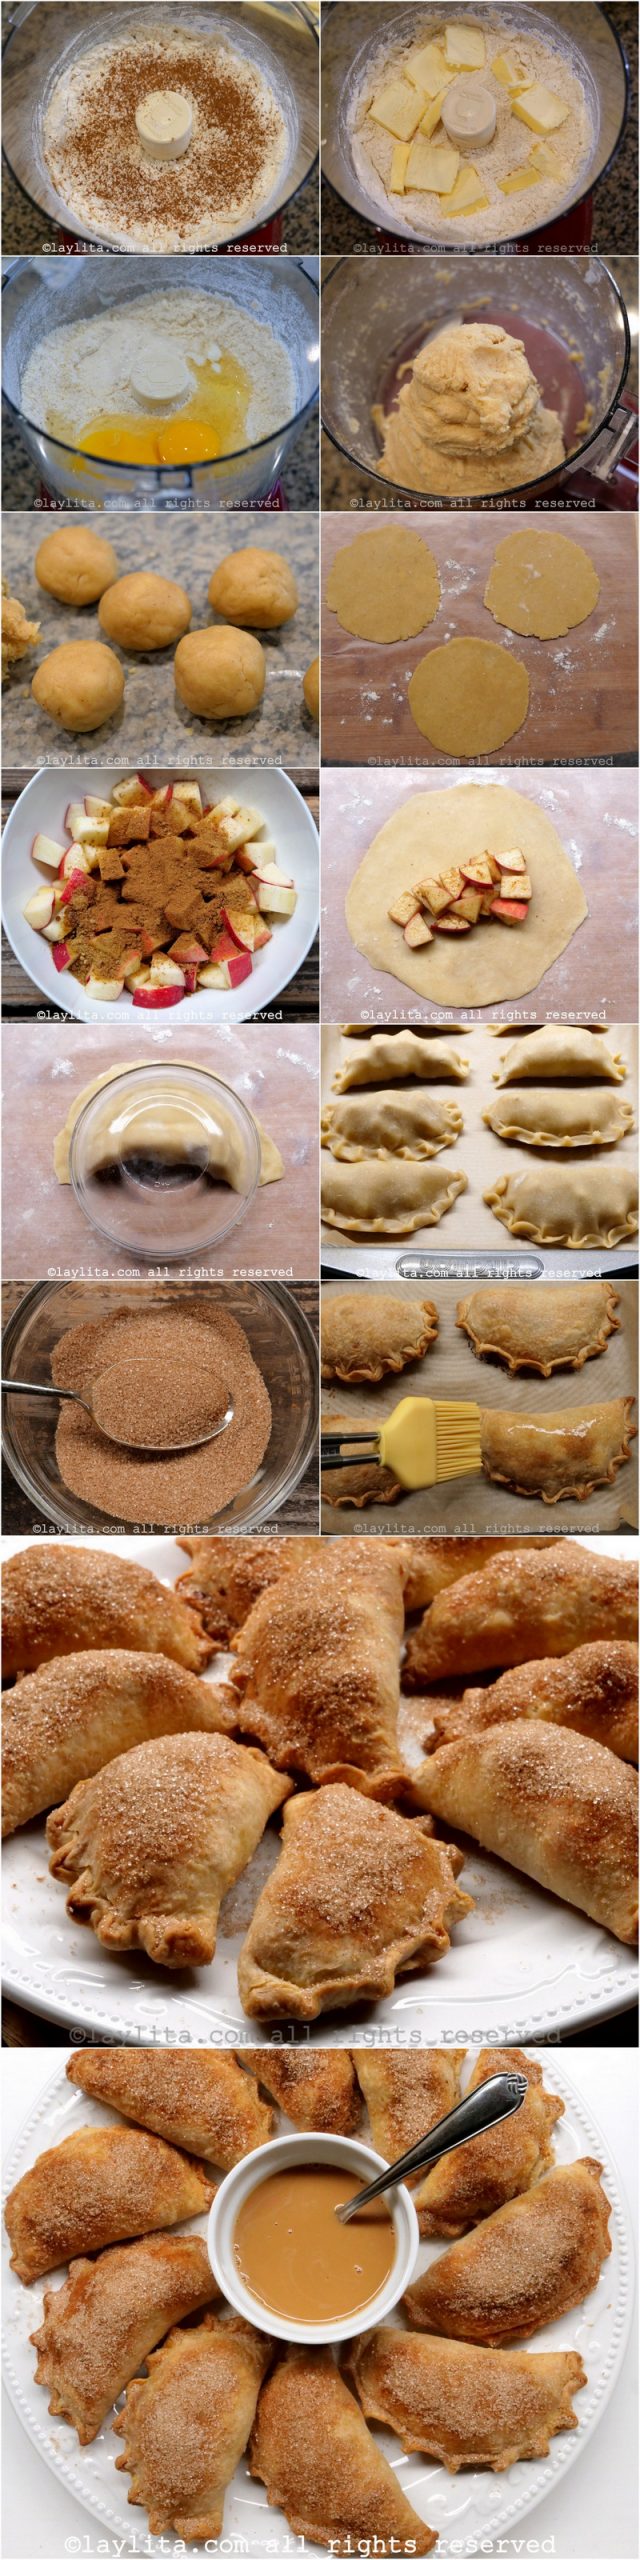 Step by step preparation for homemade apple empanadas or baked fruit turnovers